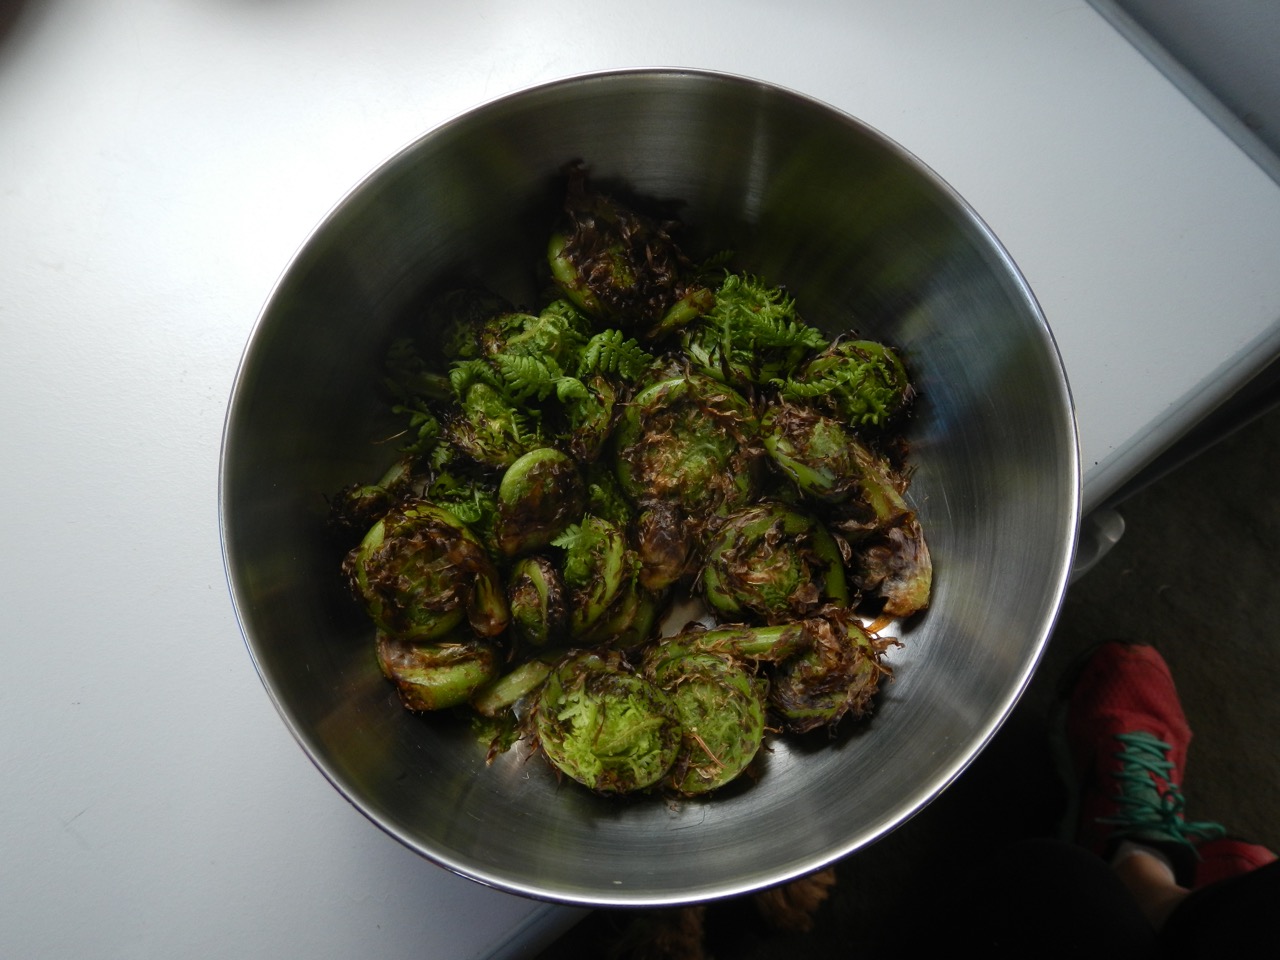 Wild-crafted fiddleheads from our forest walk :)